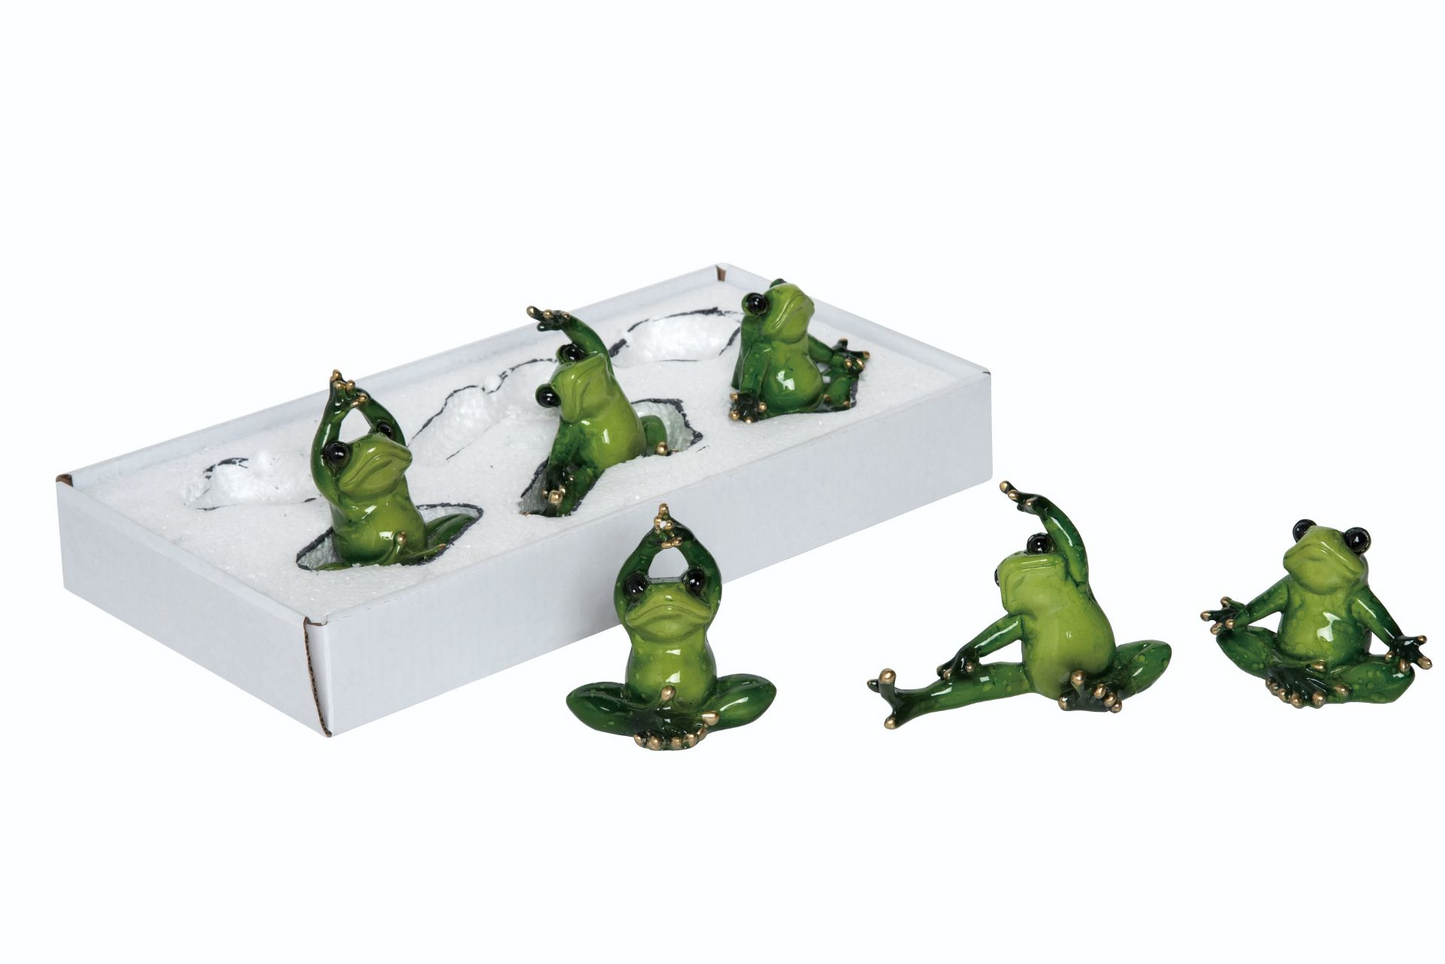 Enchanted Yoga Frogs - 3 Styles - 4.5-in - Mellow Monkey